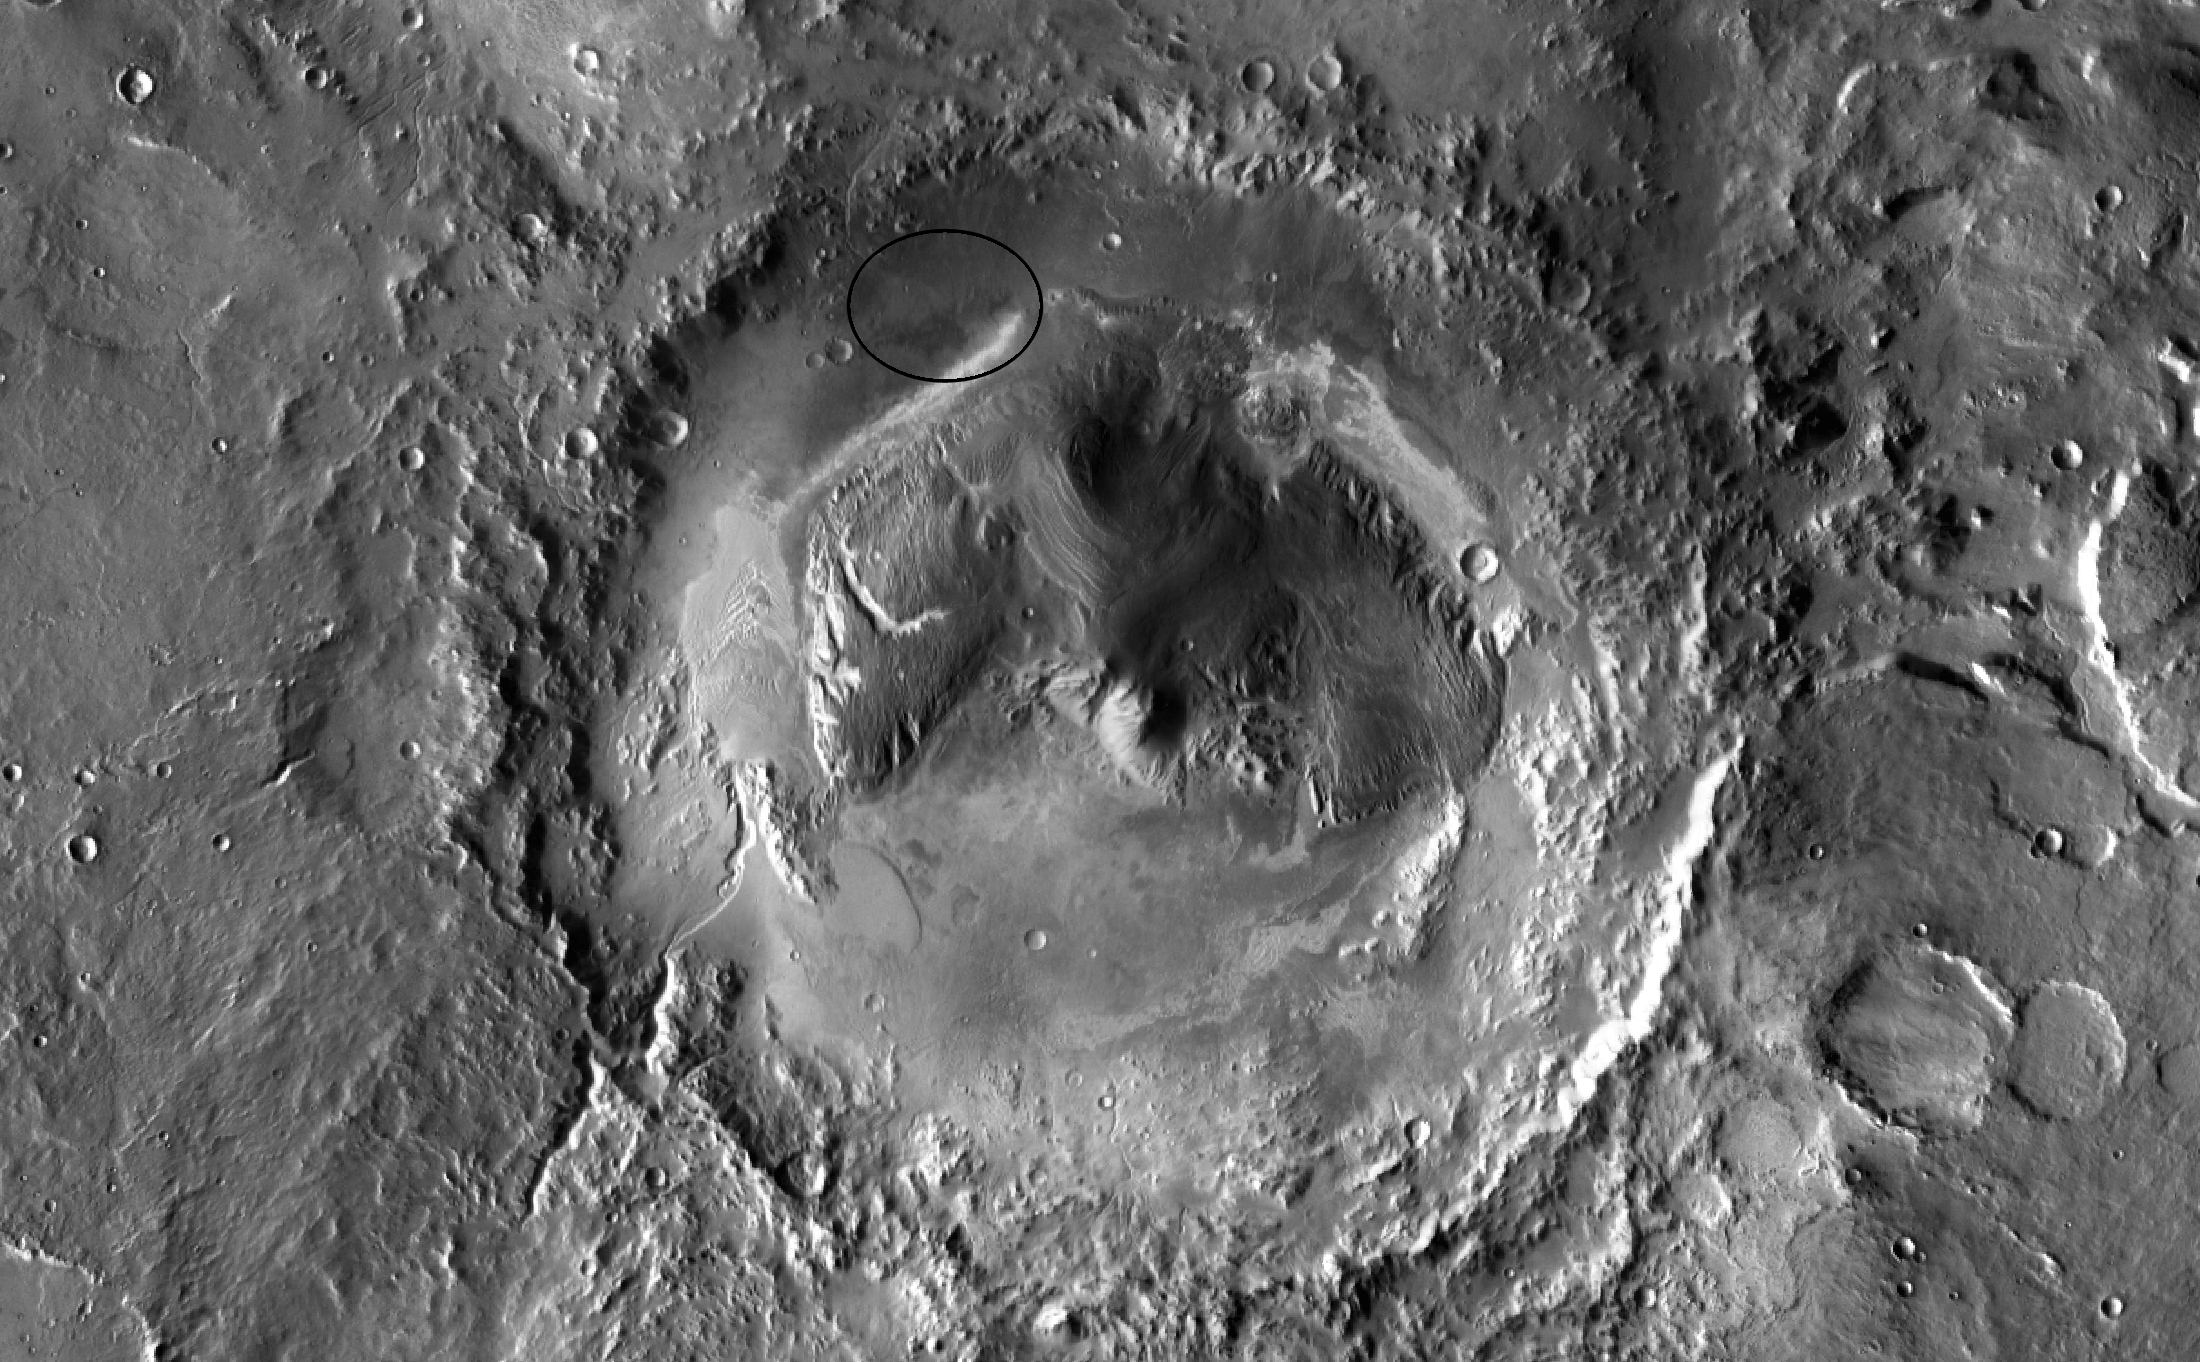 NASA has selected Gale crater as the landing site for the Mars Science Laboratory mission.